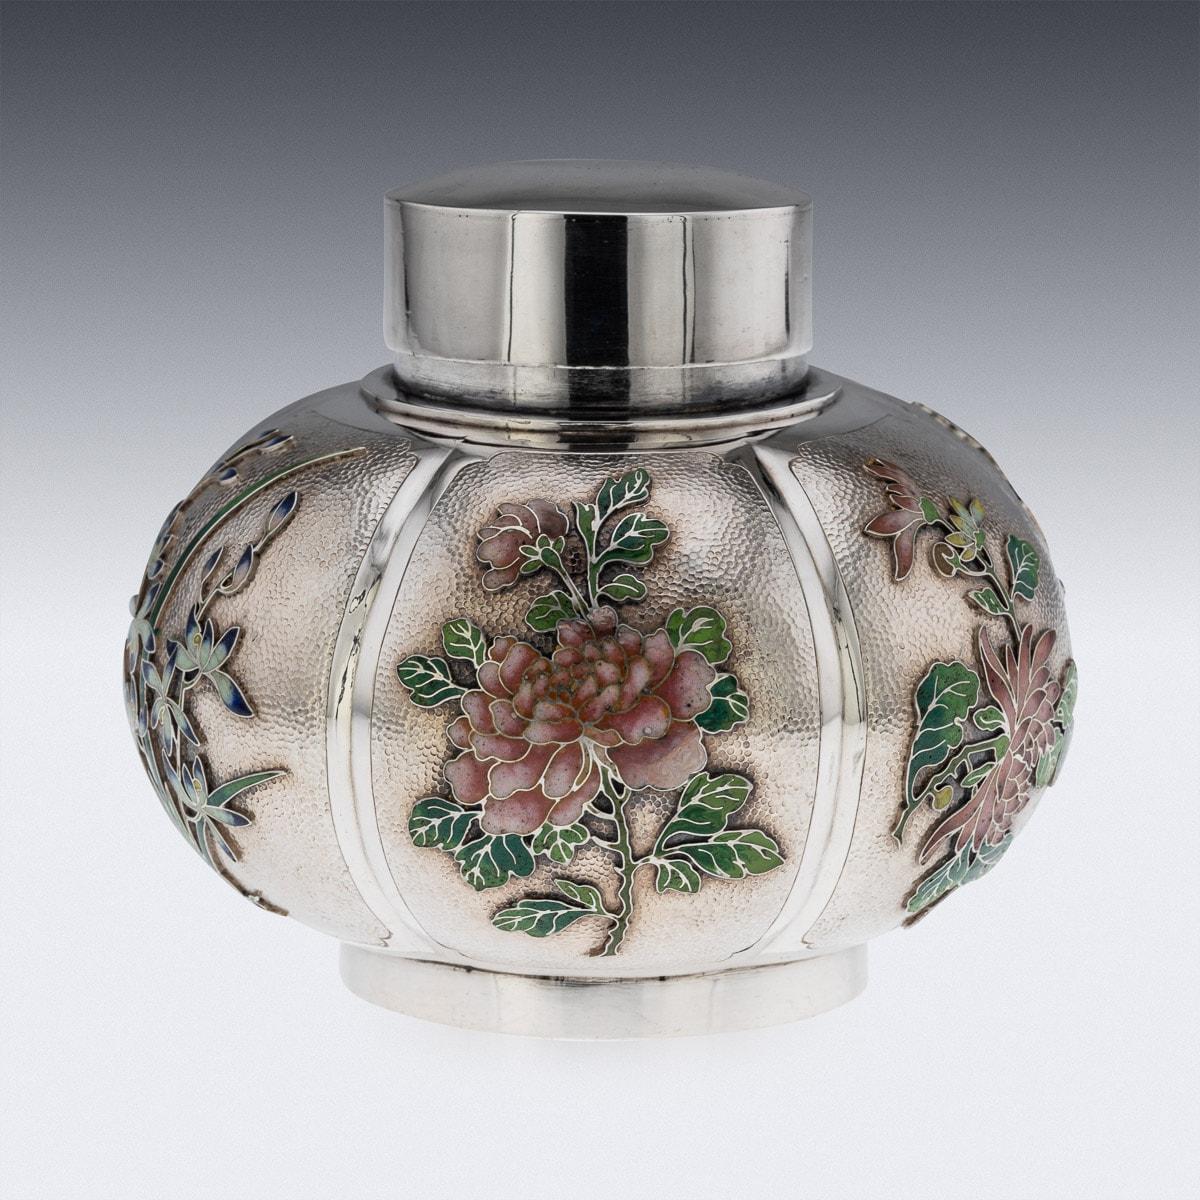 20th Century Chinese Export Solid Silver & Enamel Tea Caddy, Luen Wo, c.1900 1